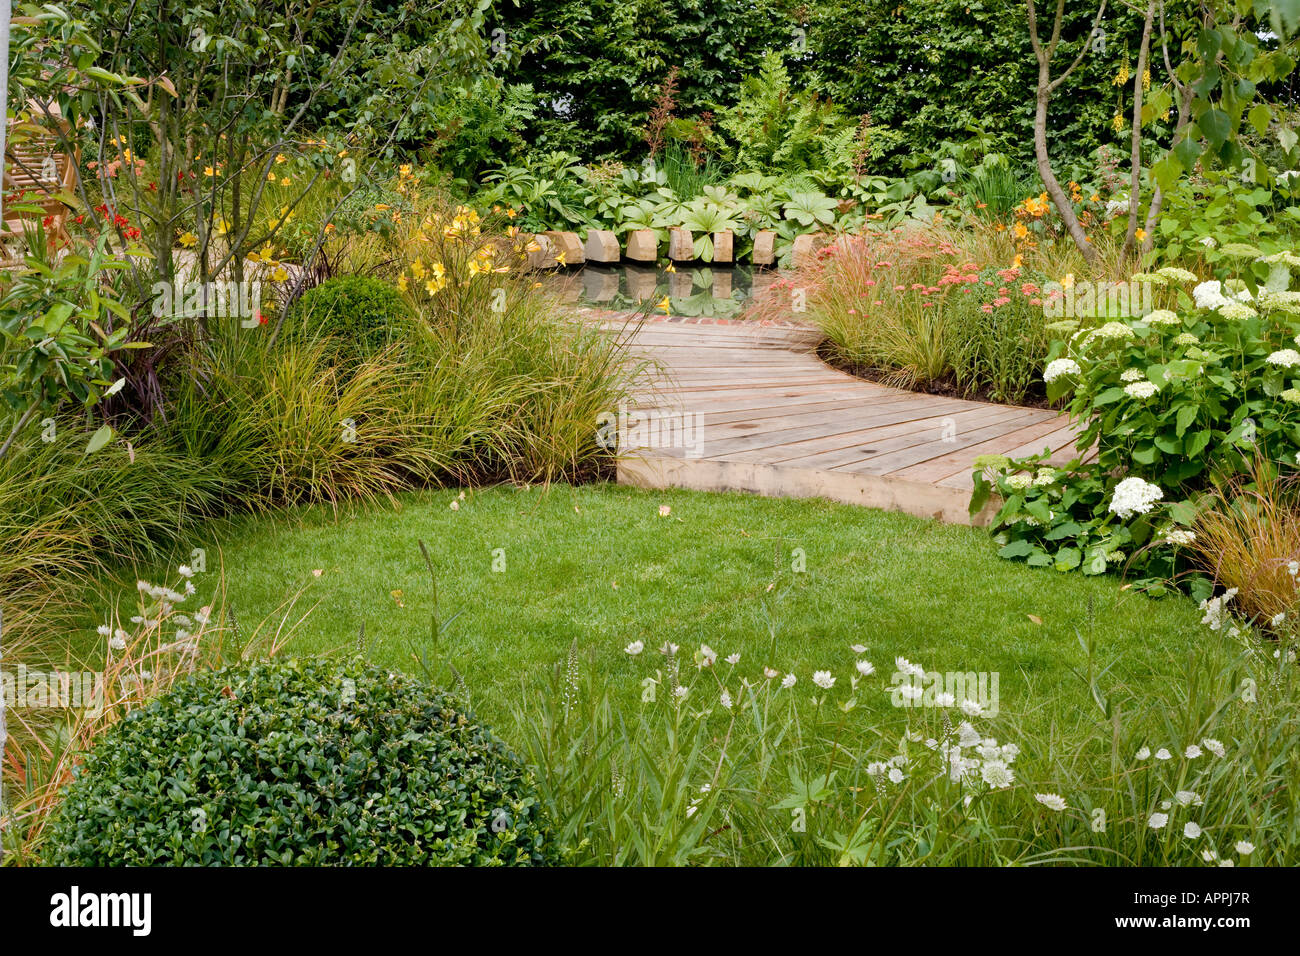 Contemporary city garden with circular lawn, boardwalk and pool Stock Photo